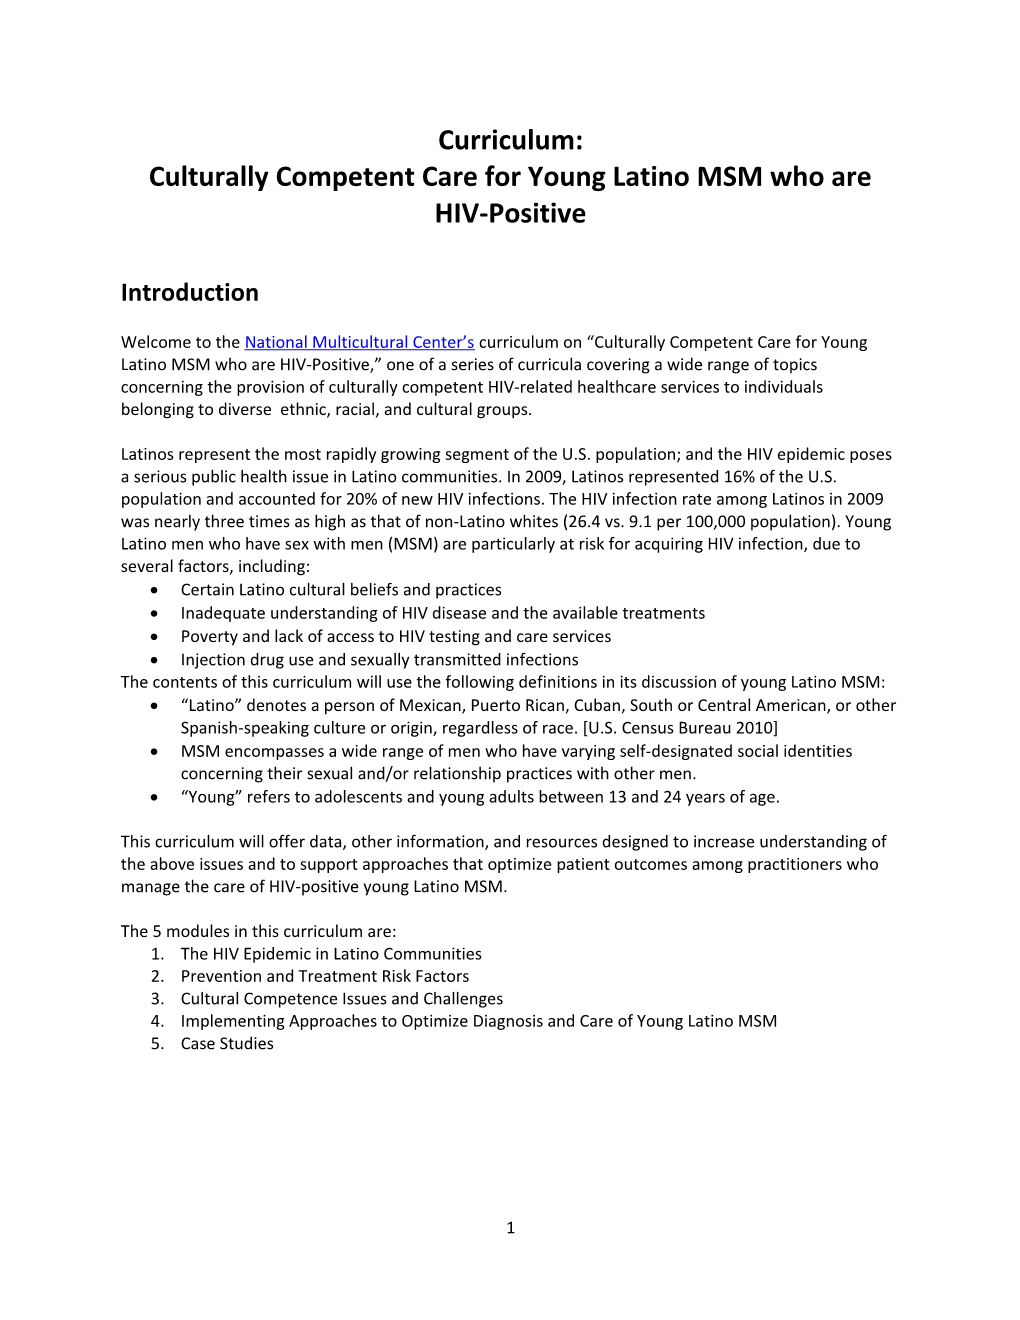 Culturally Competent Care for Young Latino MSM Who Are HIV-Positive